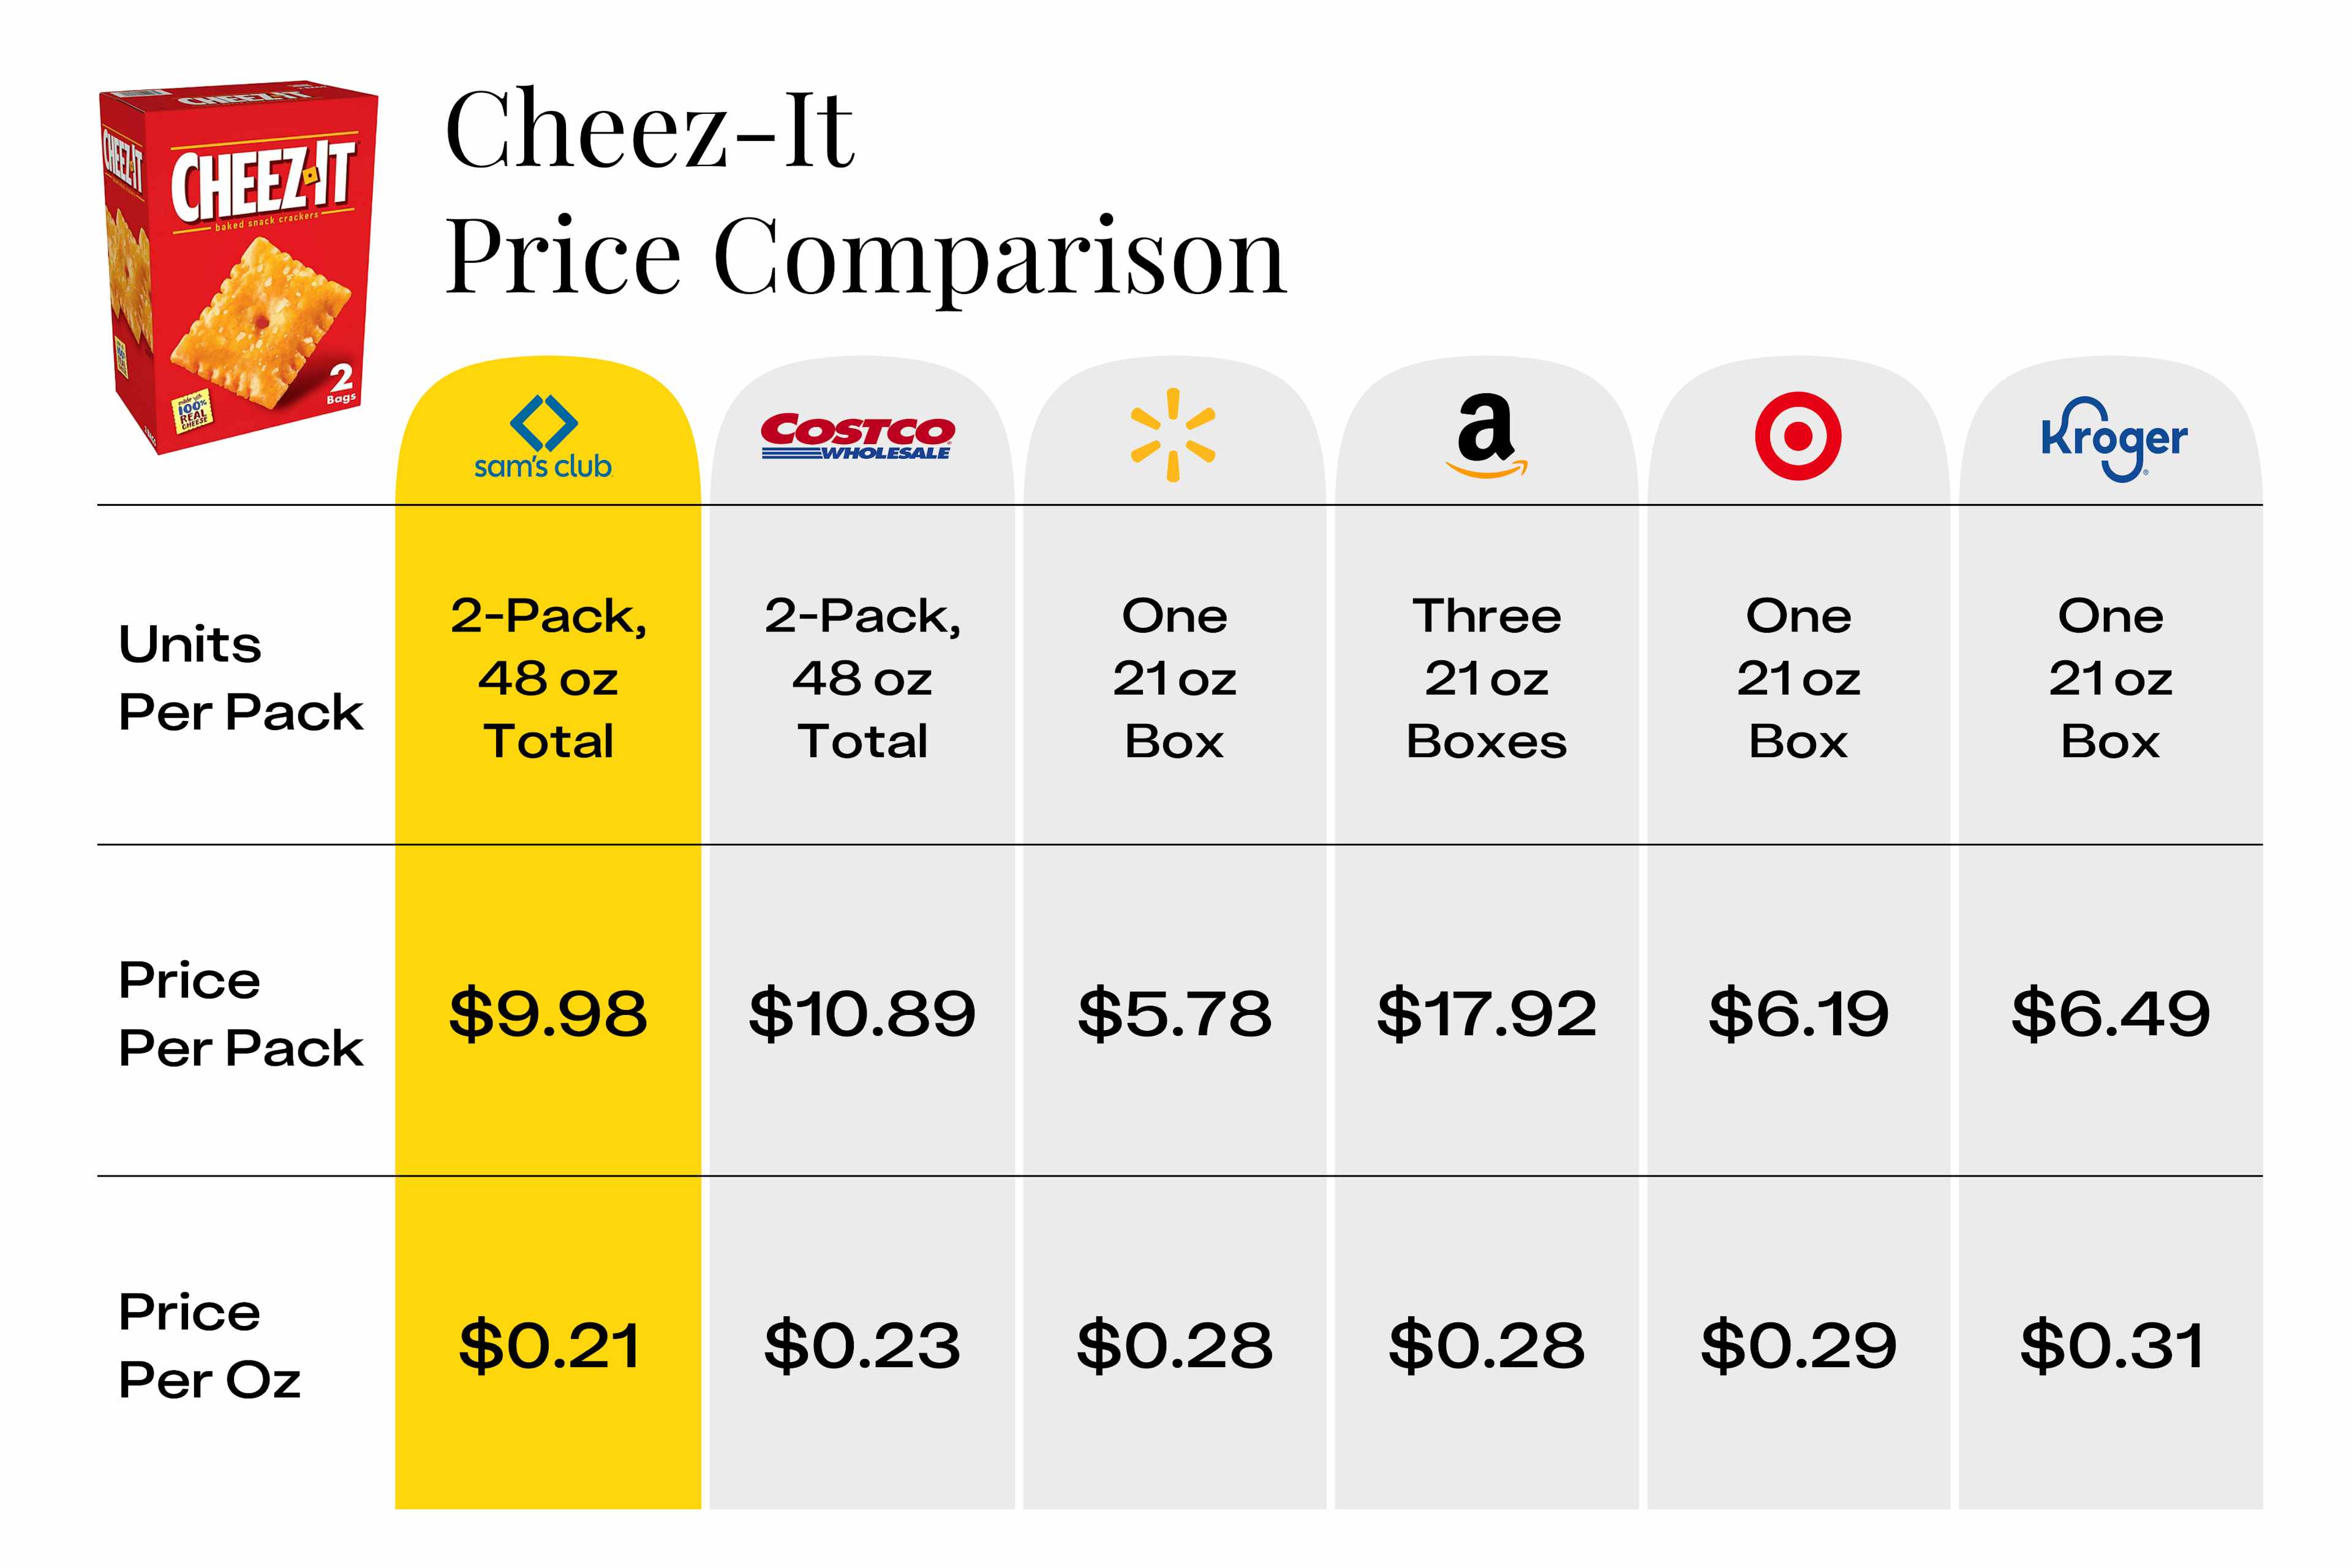 The price of Cheez-It crackers per ounce compared at six different stores, including Sam's Club.